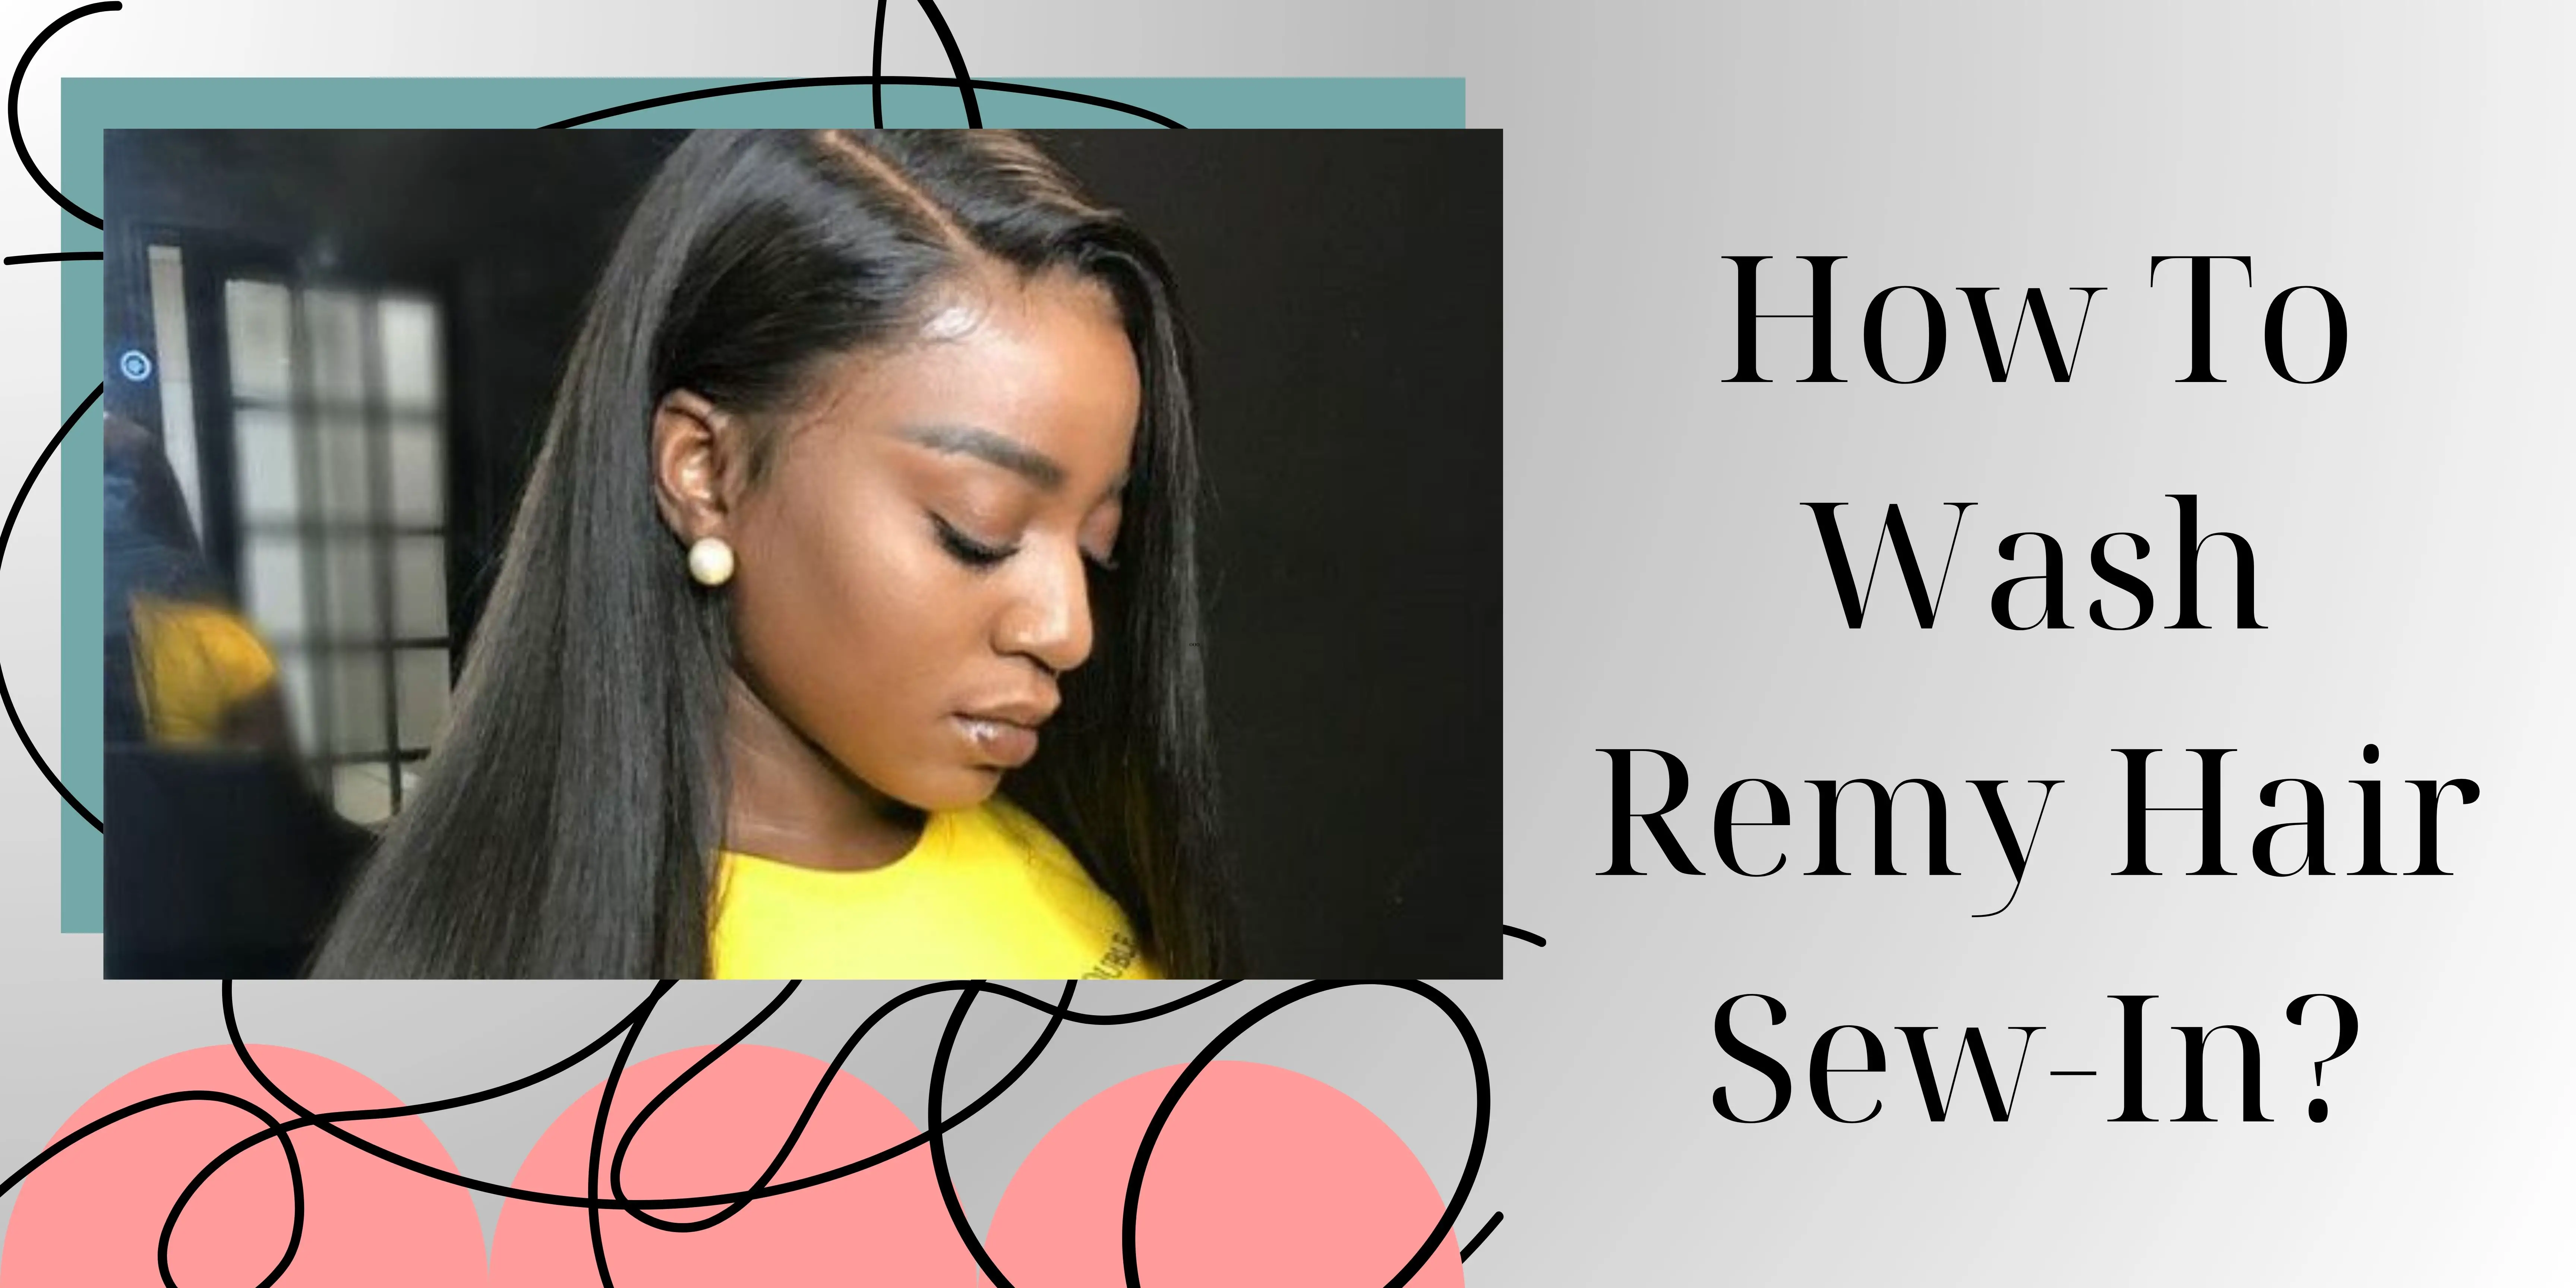 How To Wash Remy Hair Sew-In?